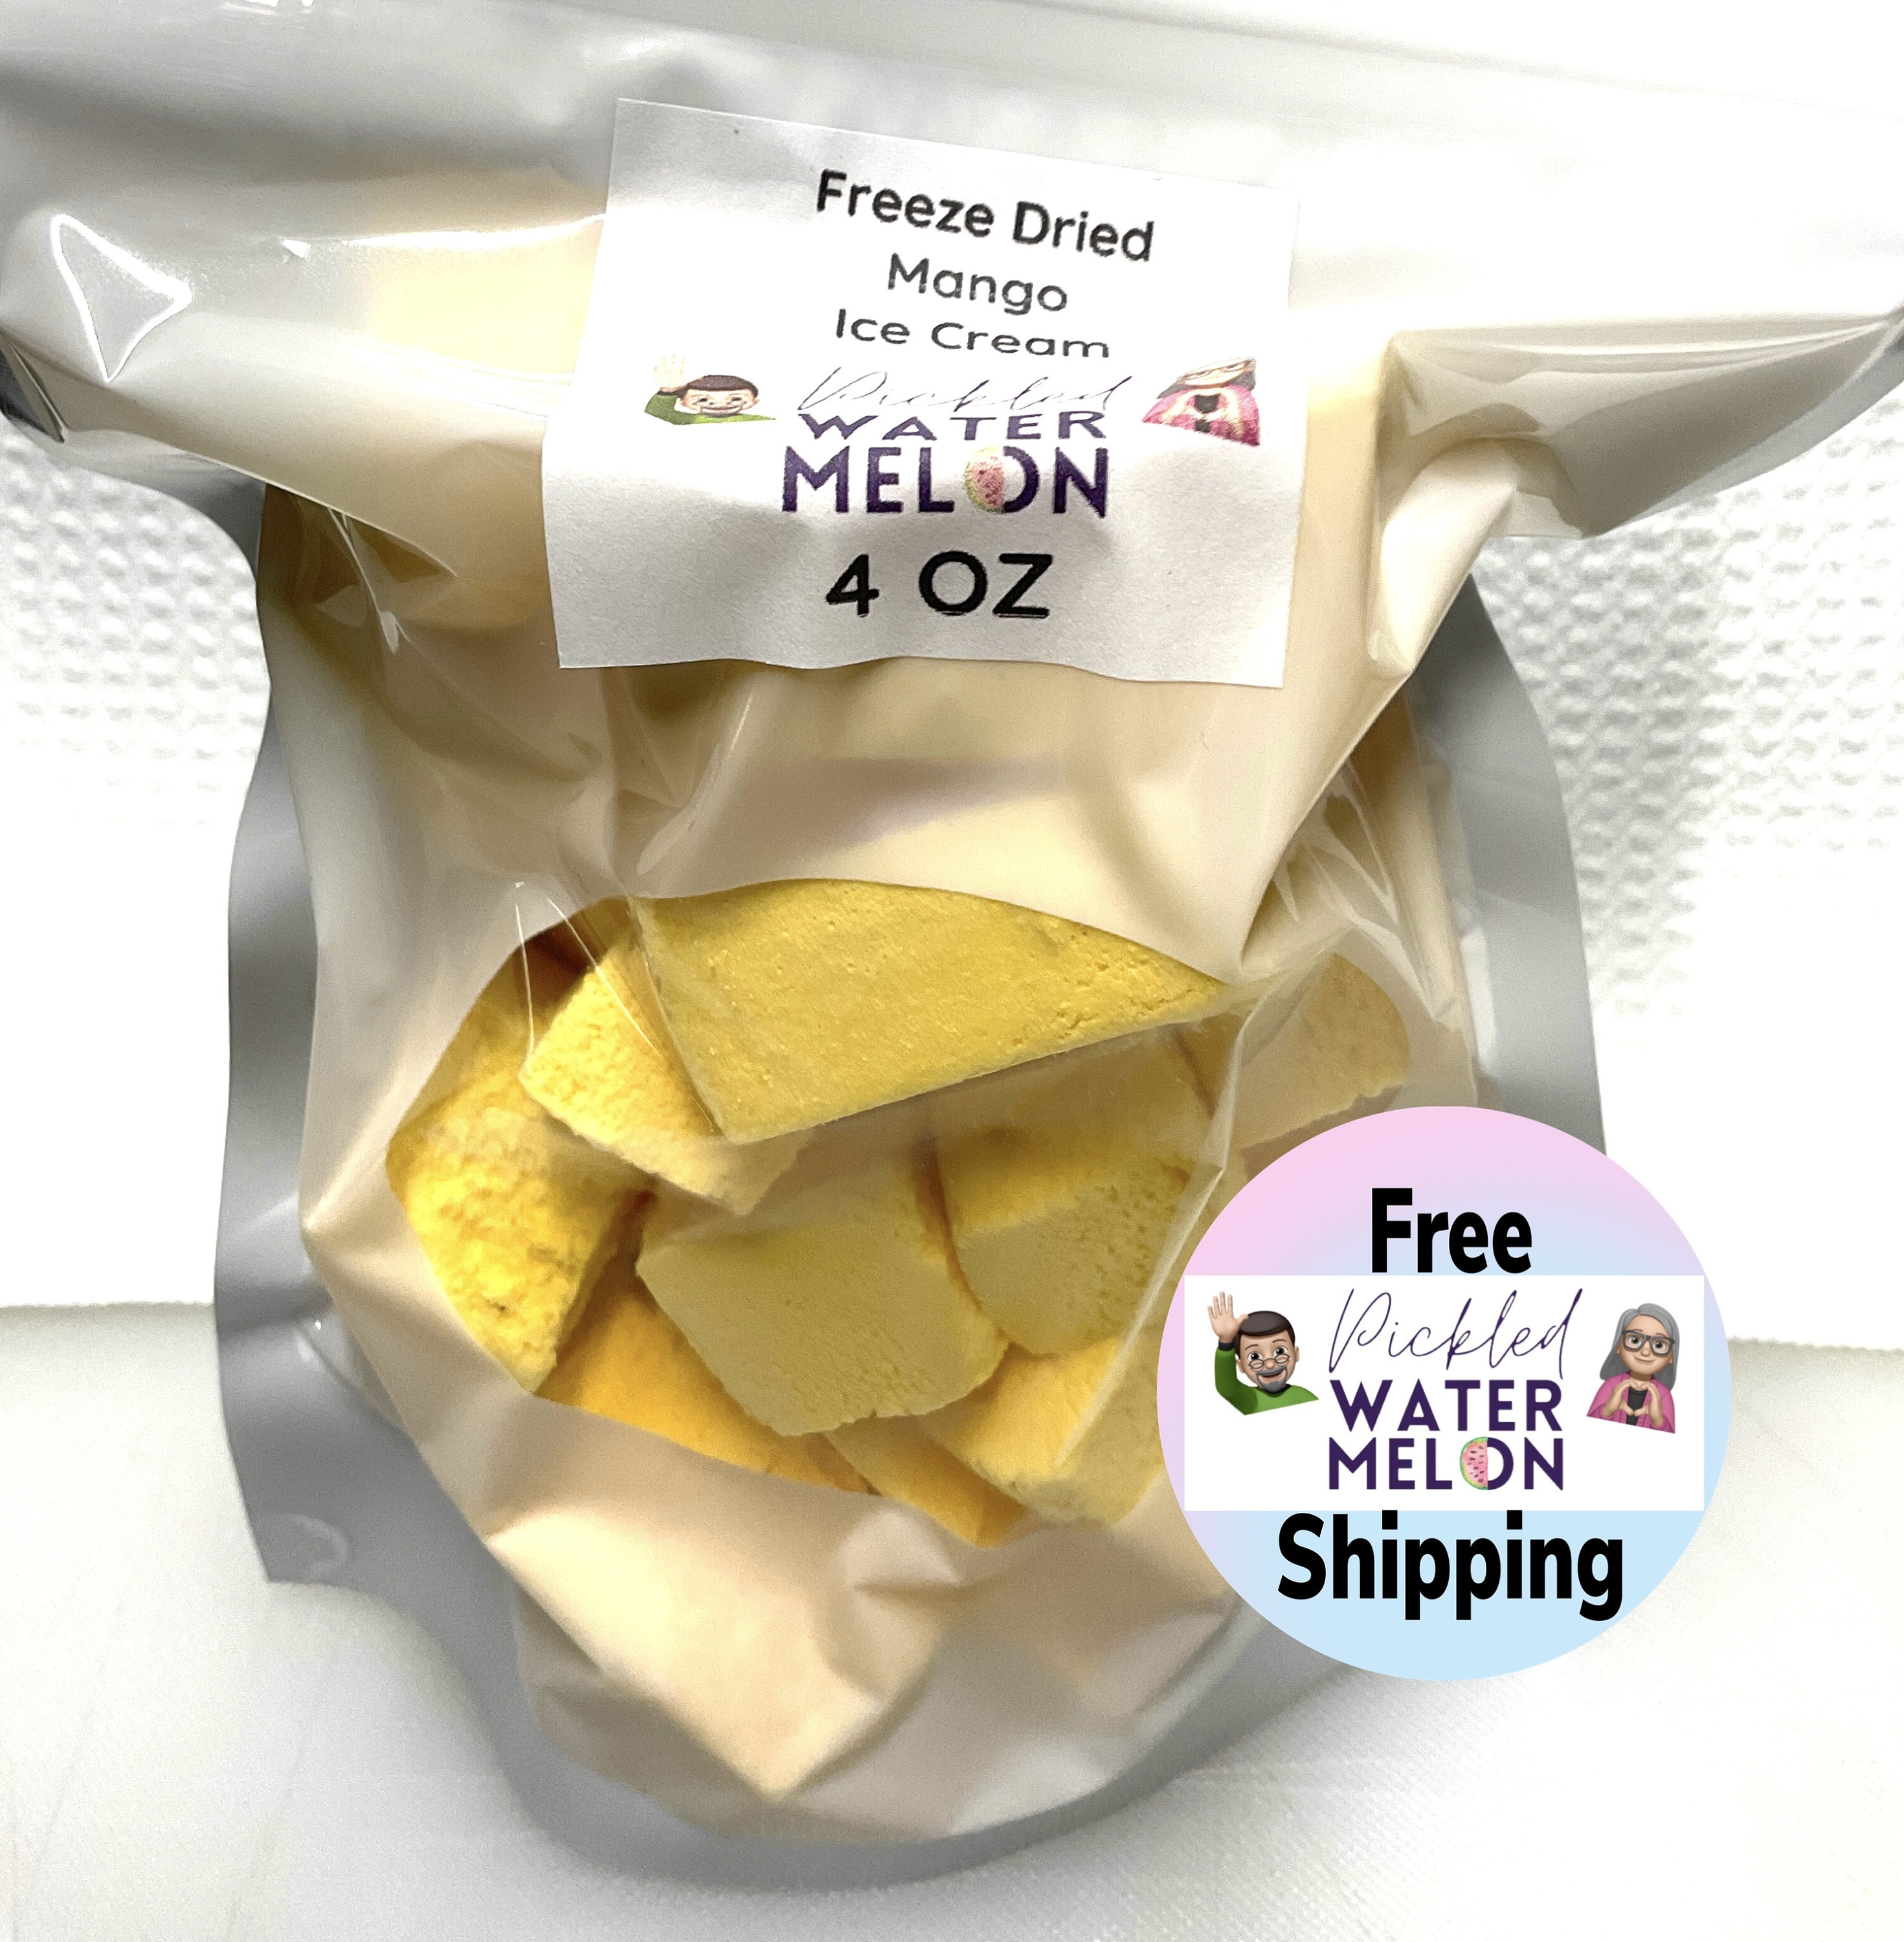 Freeze-Dried Bars+Cubes Assortment (10 Bags + Free Shipping)